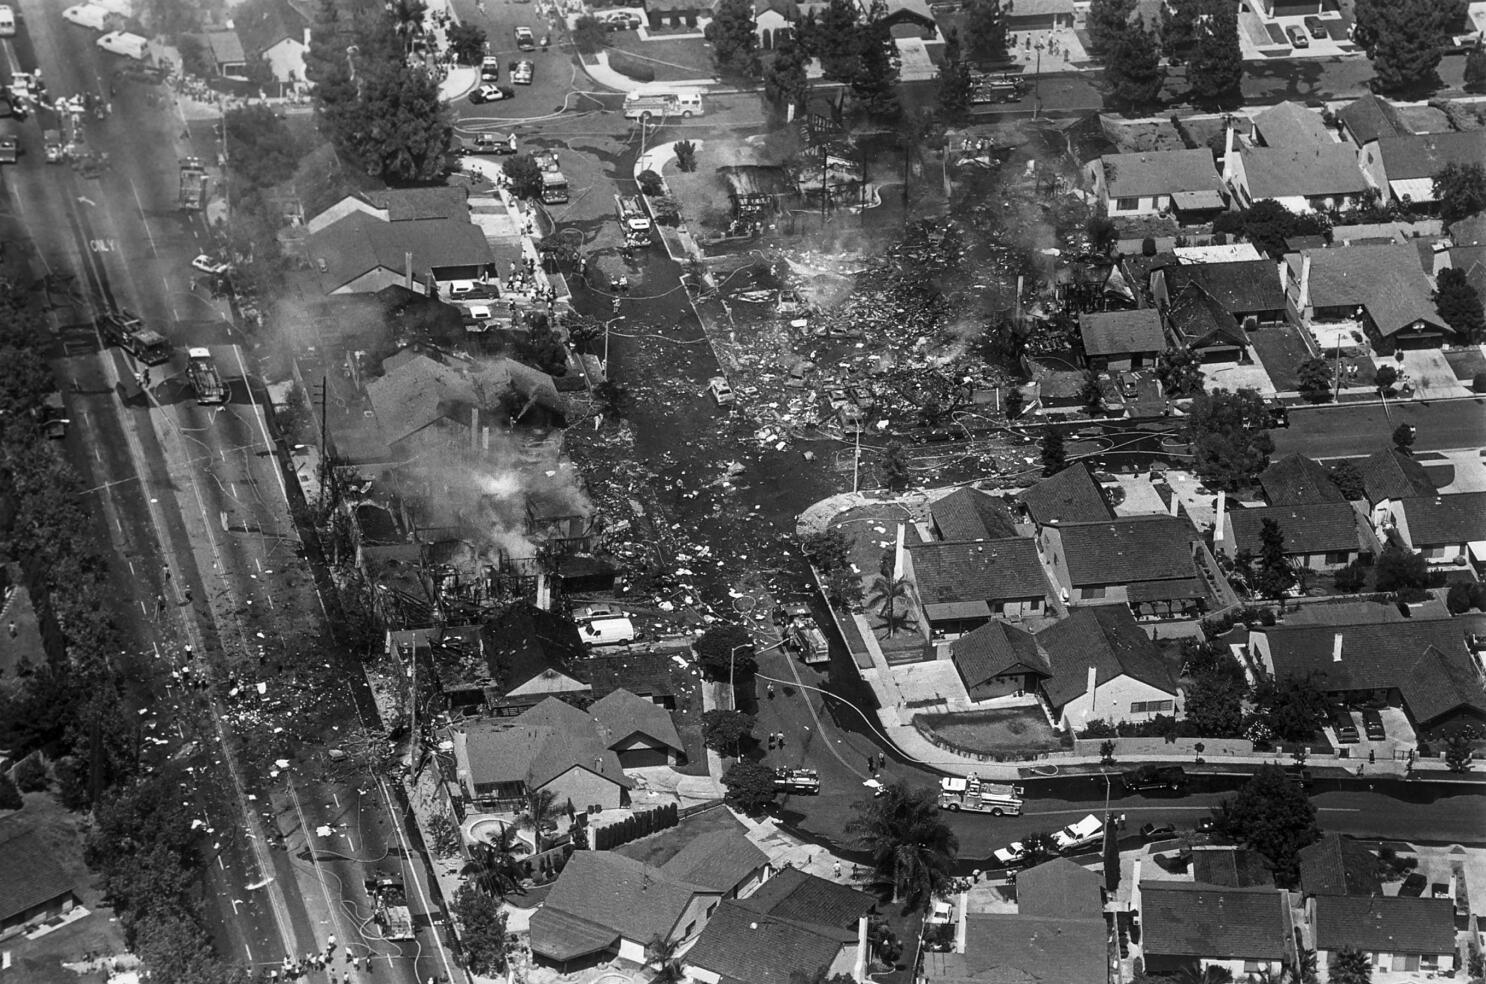 Cruelty of Chance: The Cerritos mid-air collision and the crash of